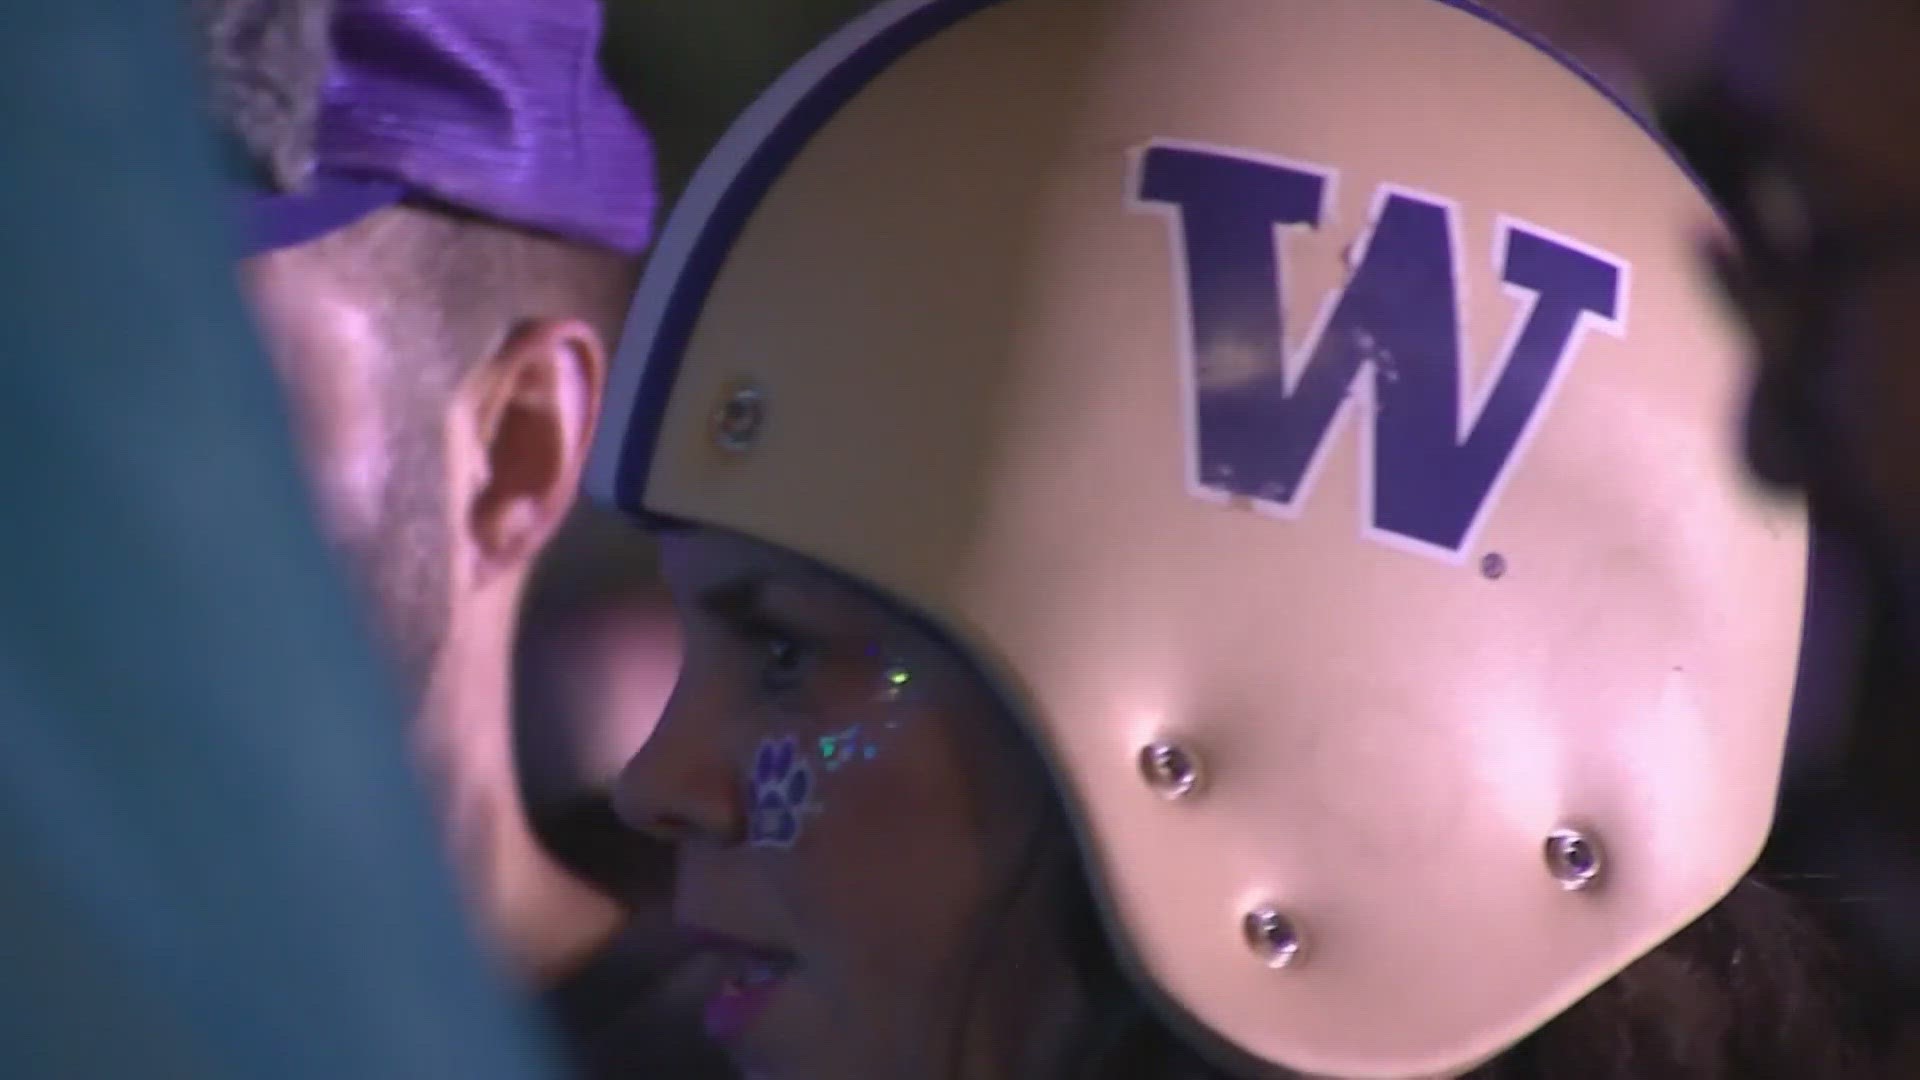 UW fans said they are still proud of the team, which will go down as one of their favorite teams of all time.